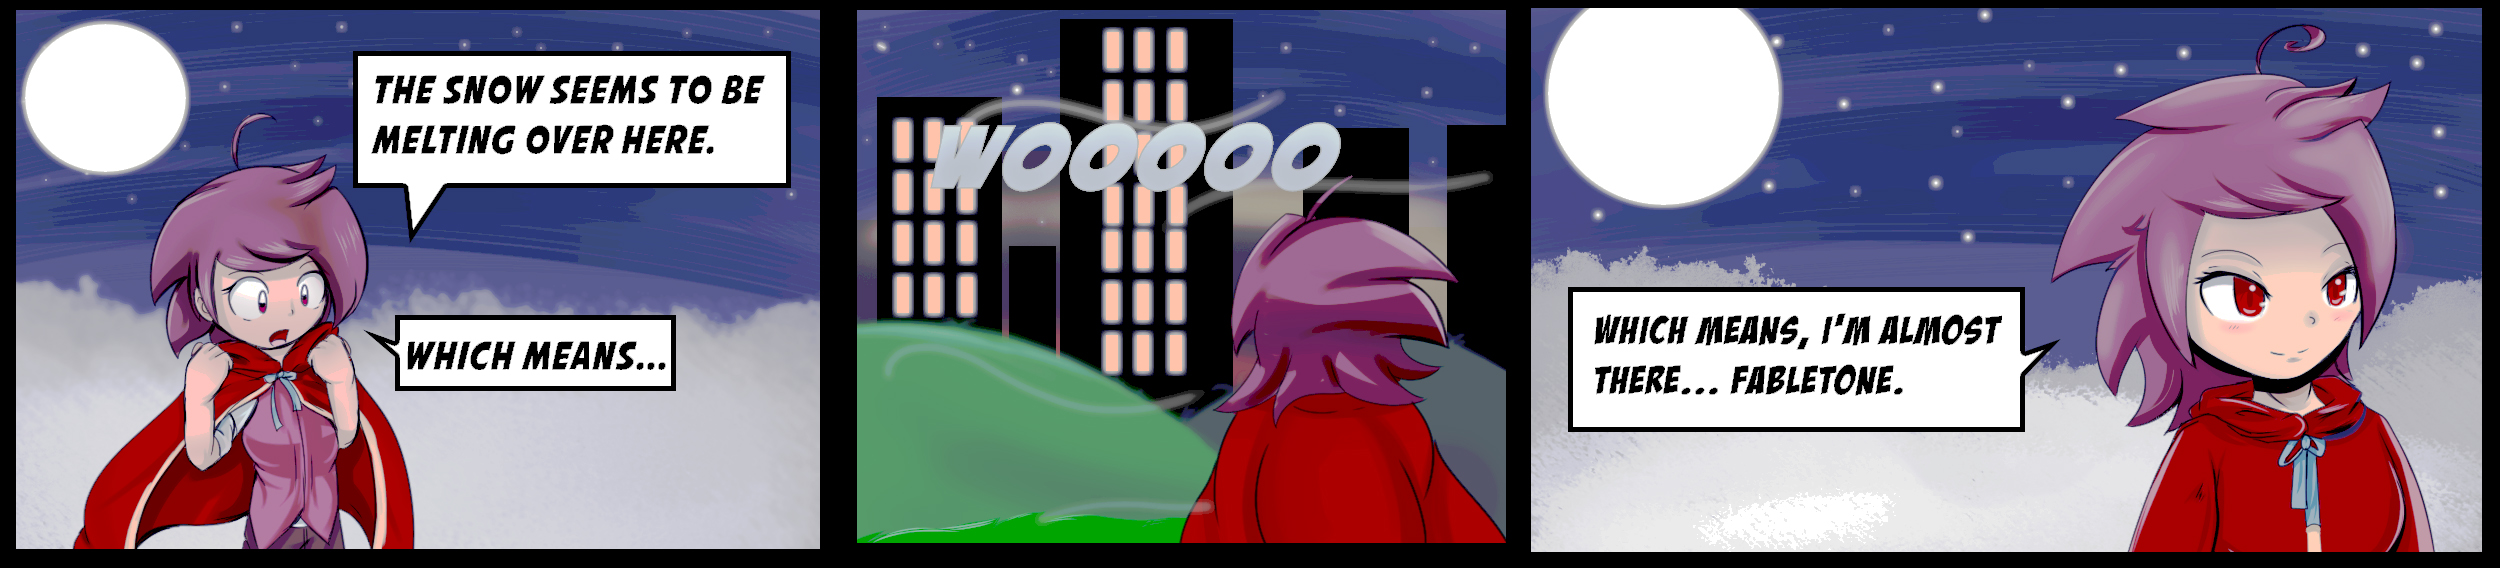 Comic strip of girl in red cloak saying "The snow seems to be melting...which means I am almost there..." while approaching green hillside and city skyline 